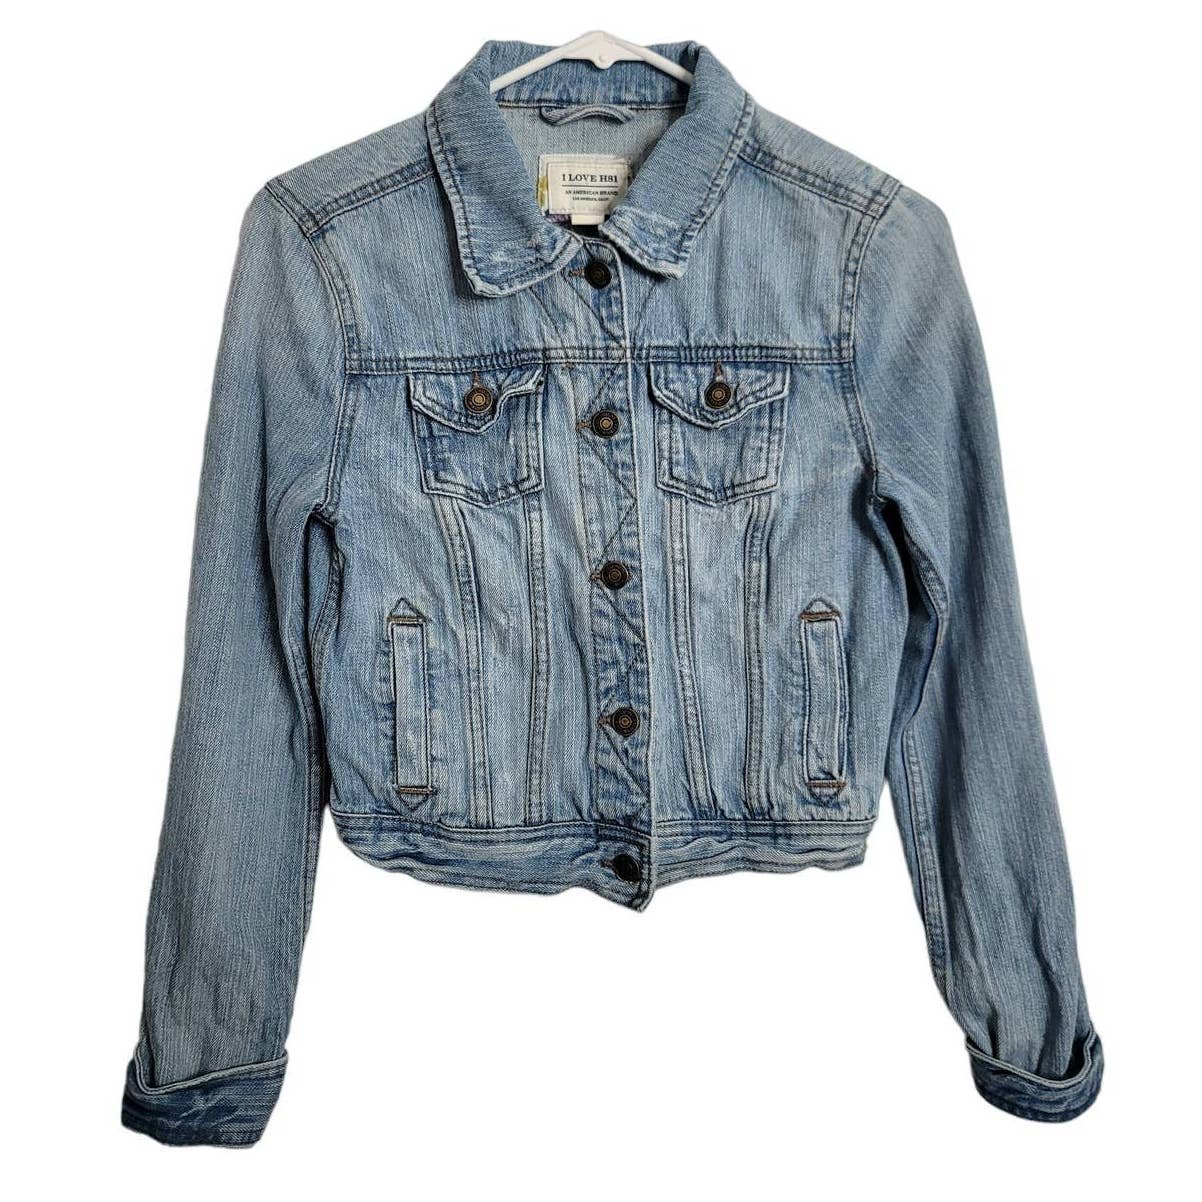 Simple I Love H81 Denim Jean Jacket Size Small ou9D2twhK Factory Price